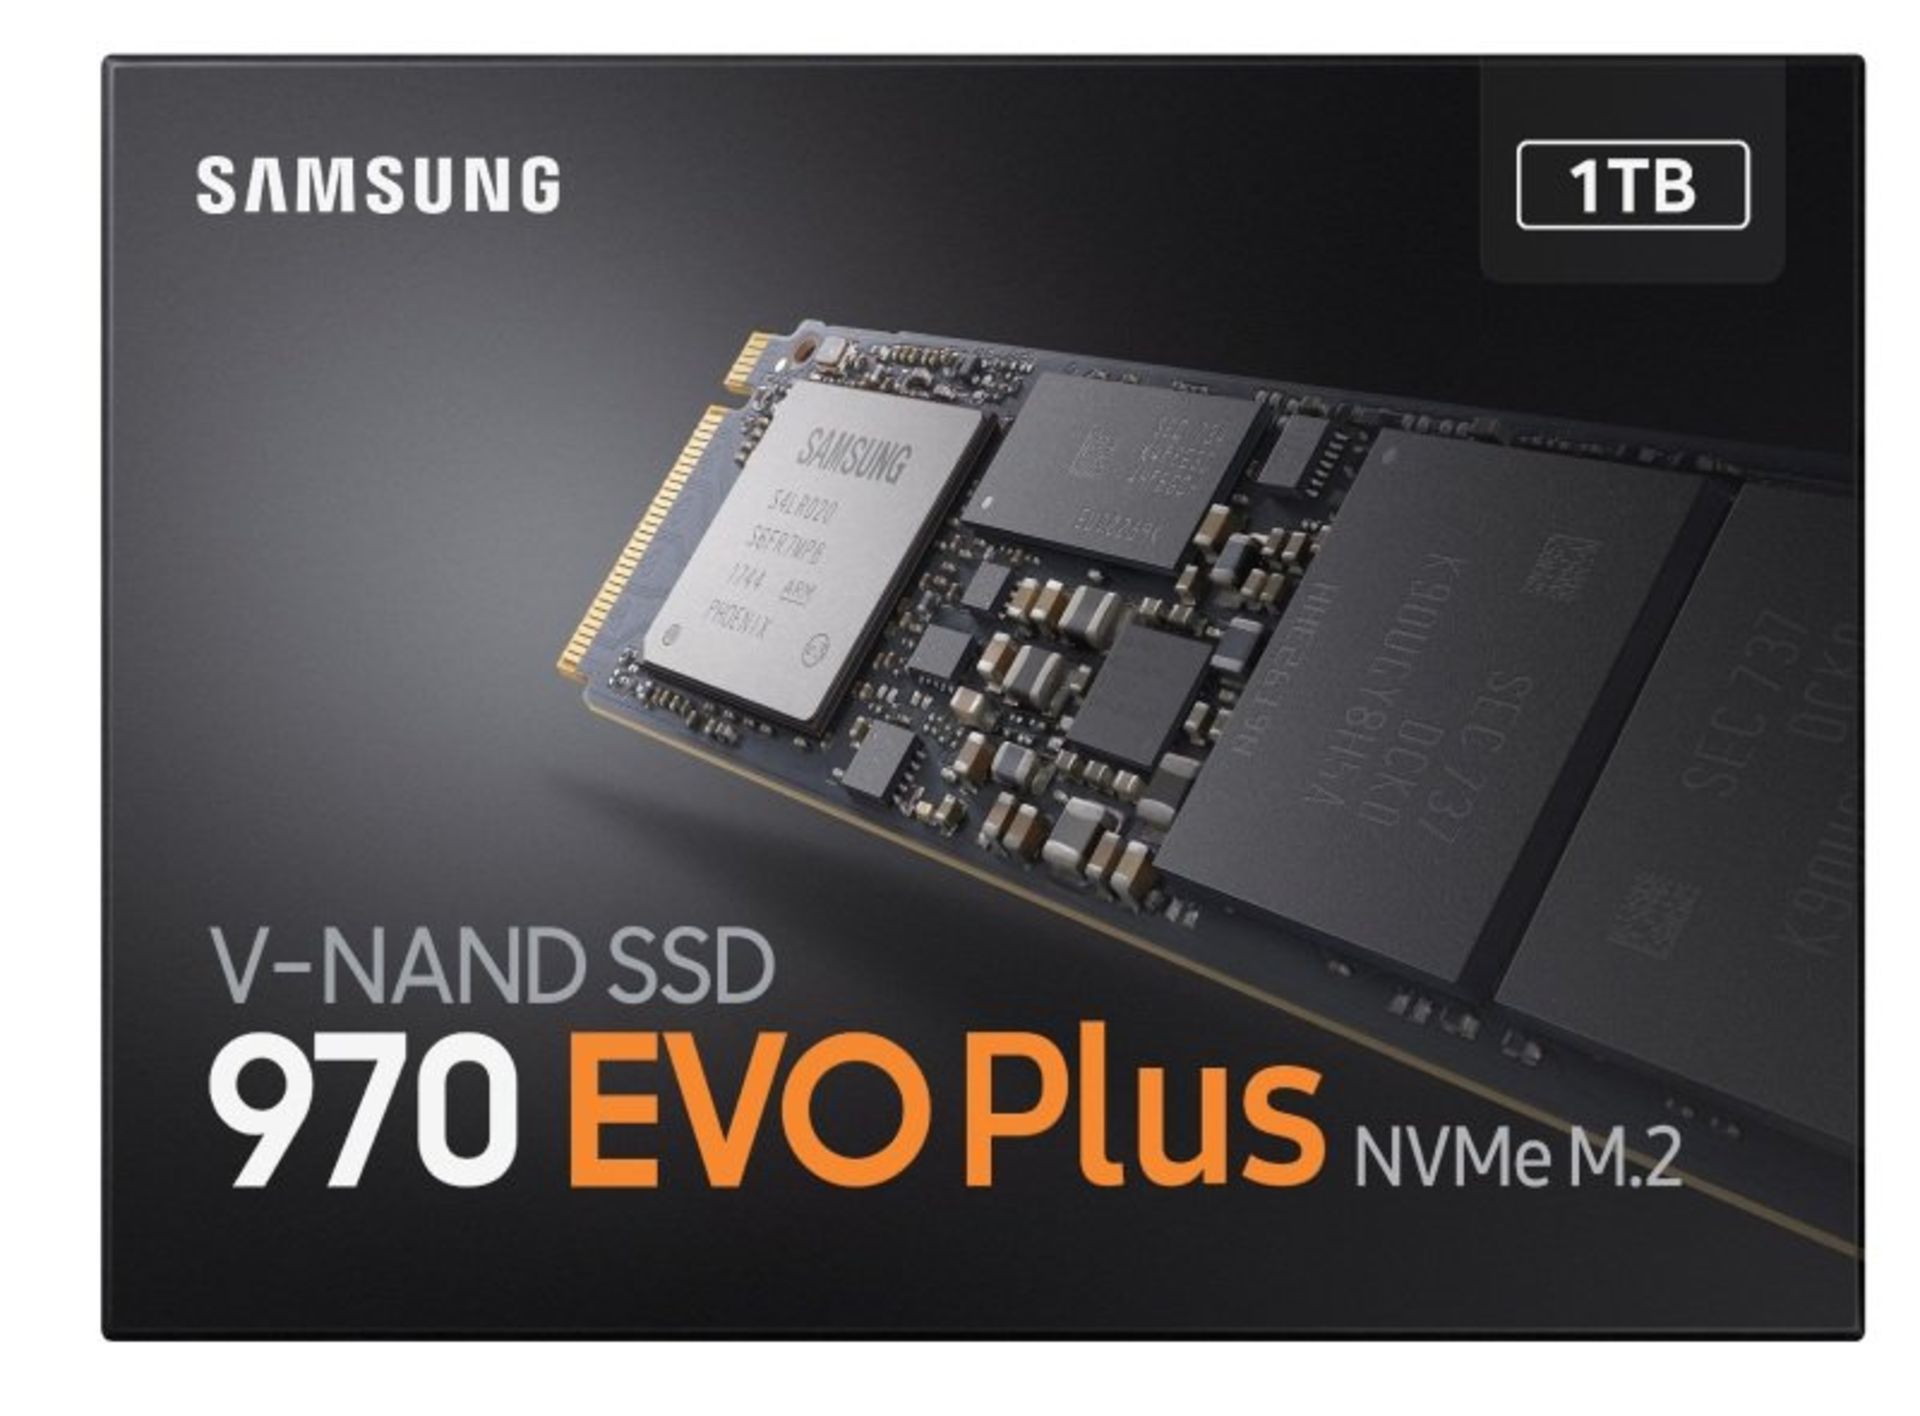 BRAND NEW FACTORY SEALED SAMSUNG 970 EVO PLUS 1TB M.2 NVMe PCIe Performance SSD/Solid State Drive. - Image 3 of 4